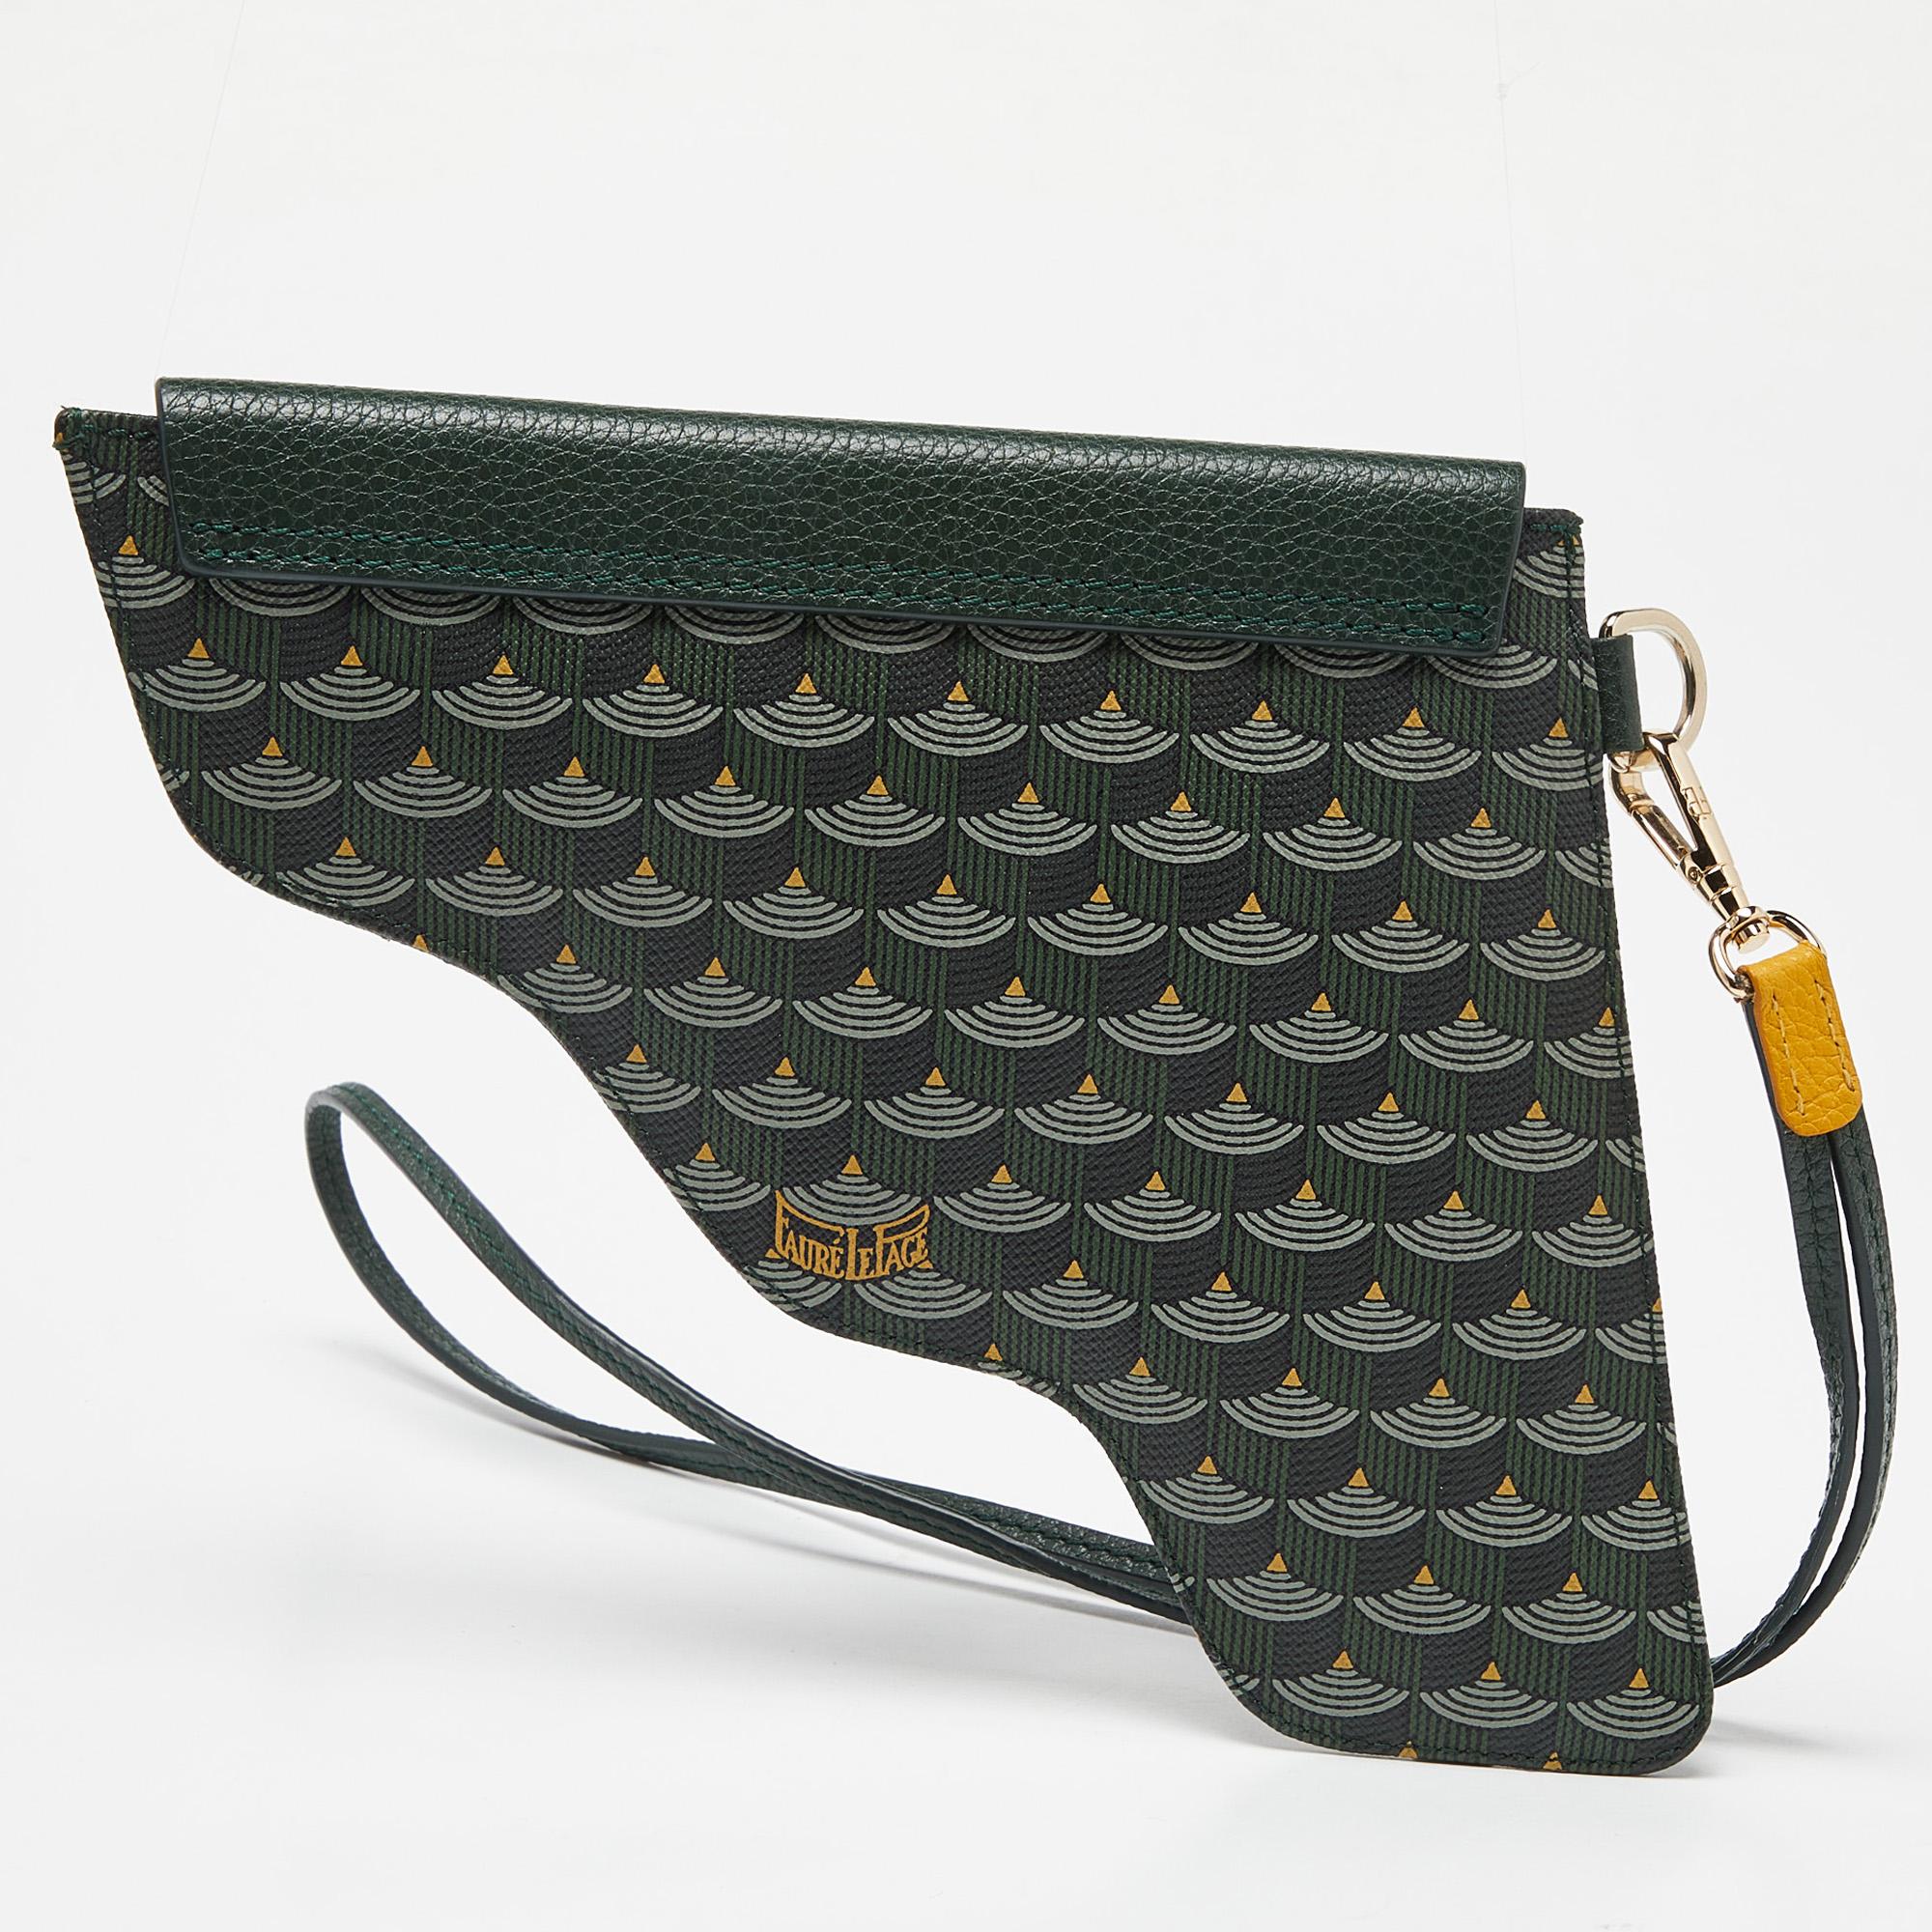 Contemporarily designed in a unique shape, this wristlet pouch from the house of Faure Le Page will be an instant hit. This green piece is made with coated canvas and is enhanced with gold-tone hardware details and a fabric-lined